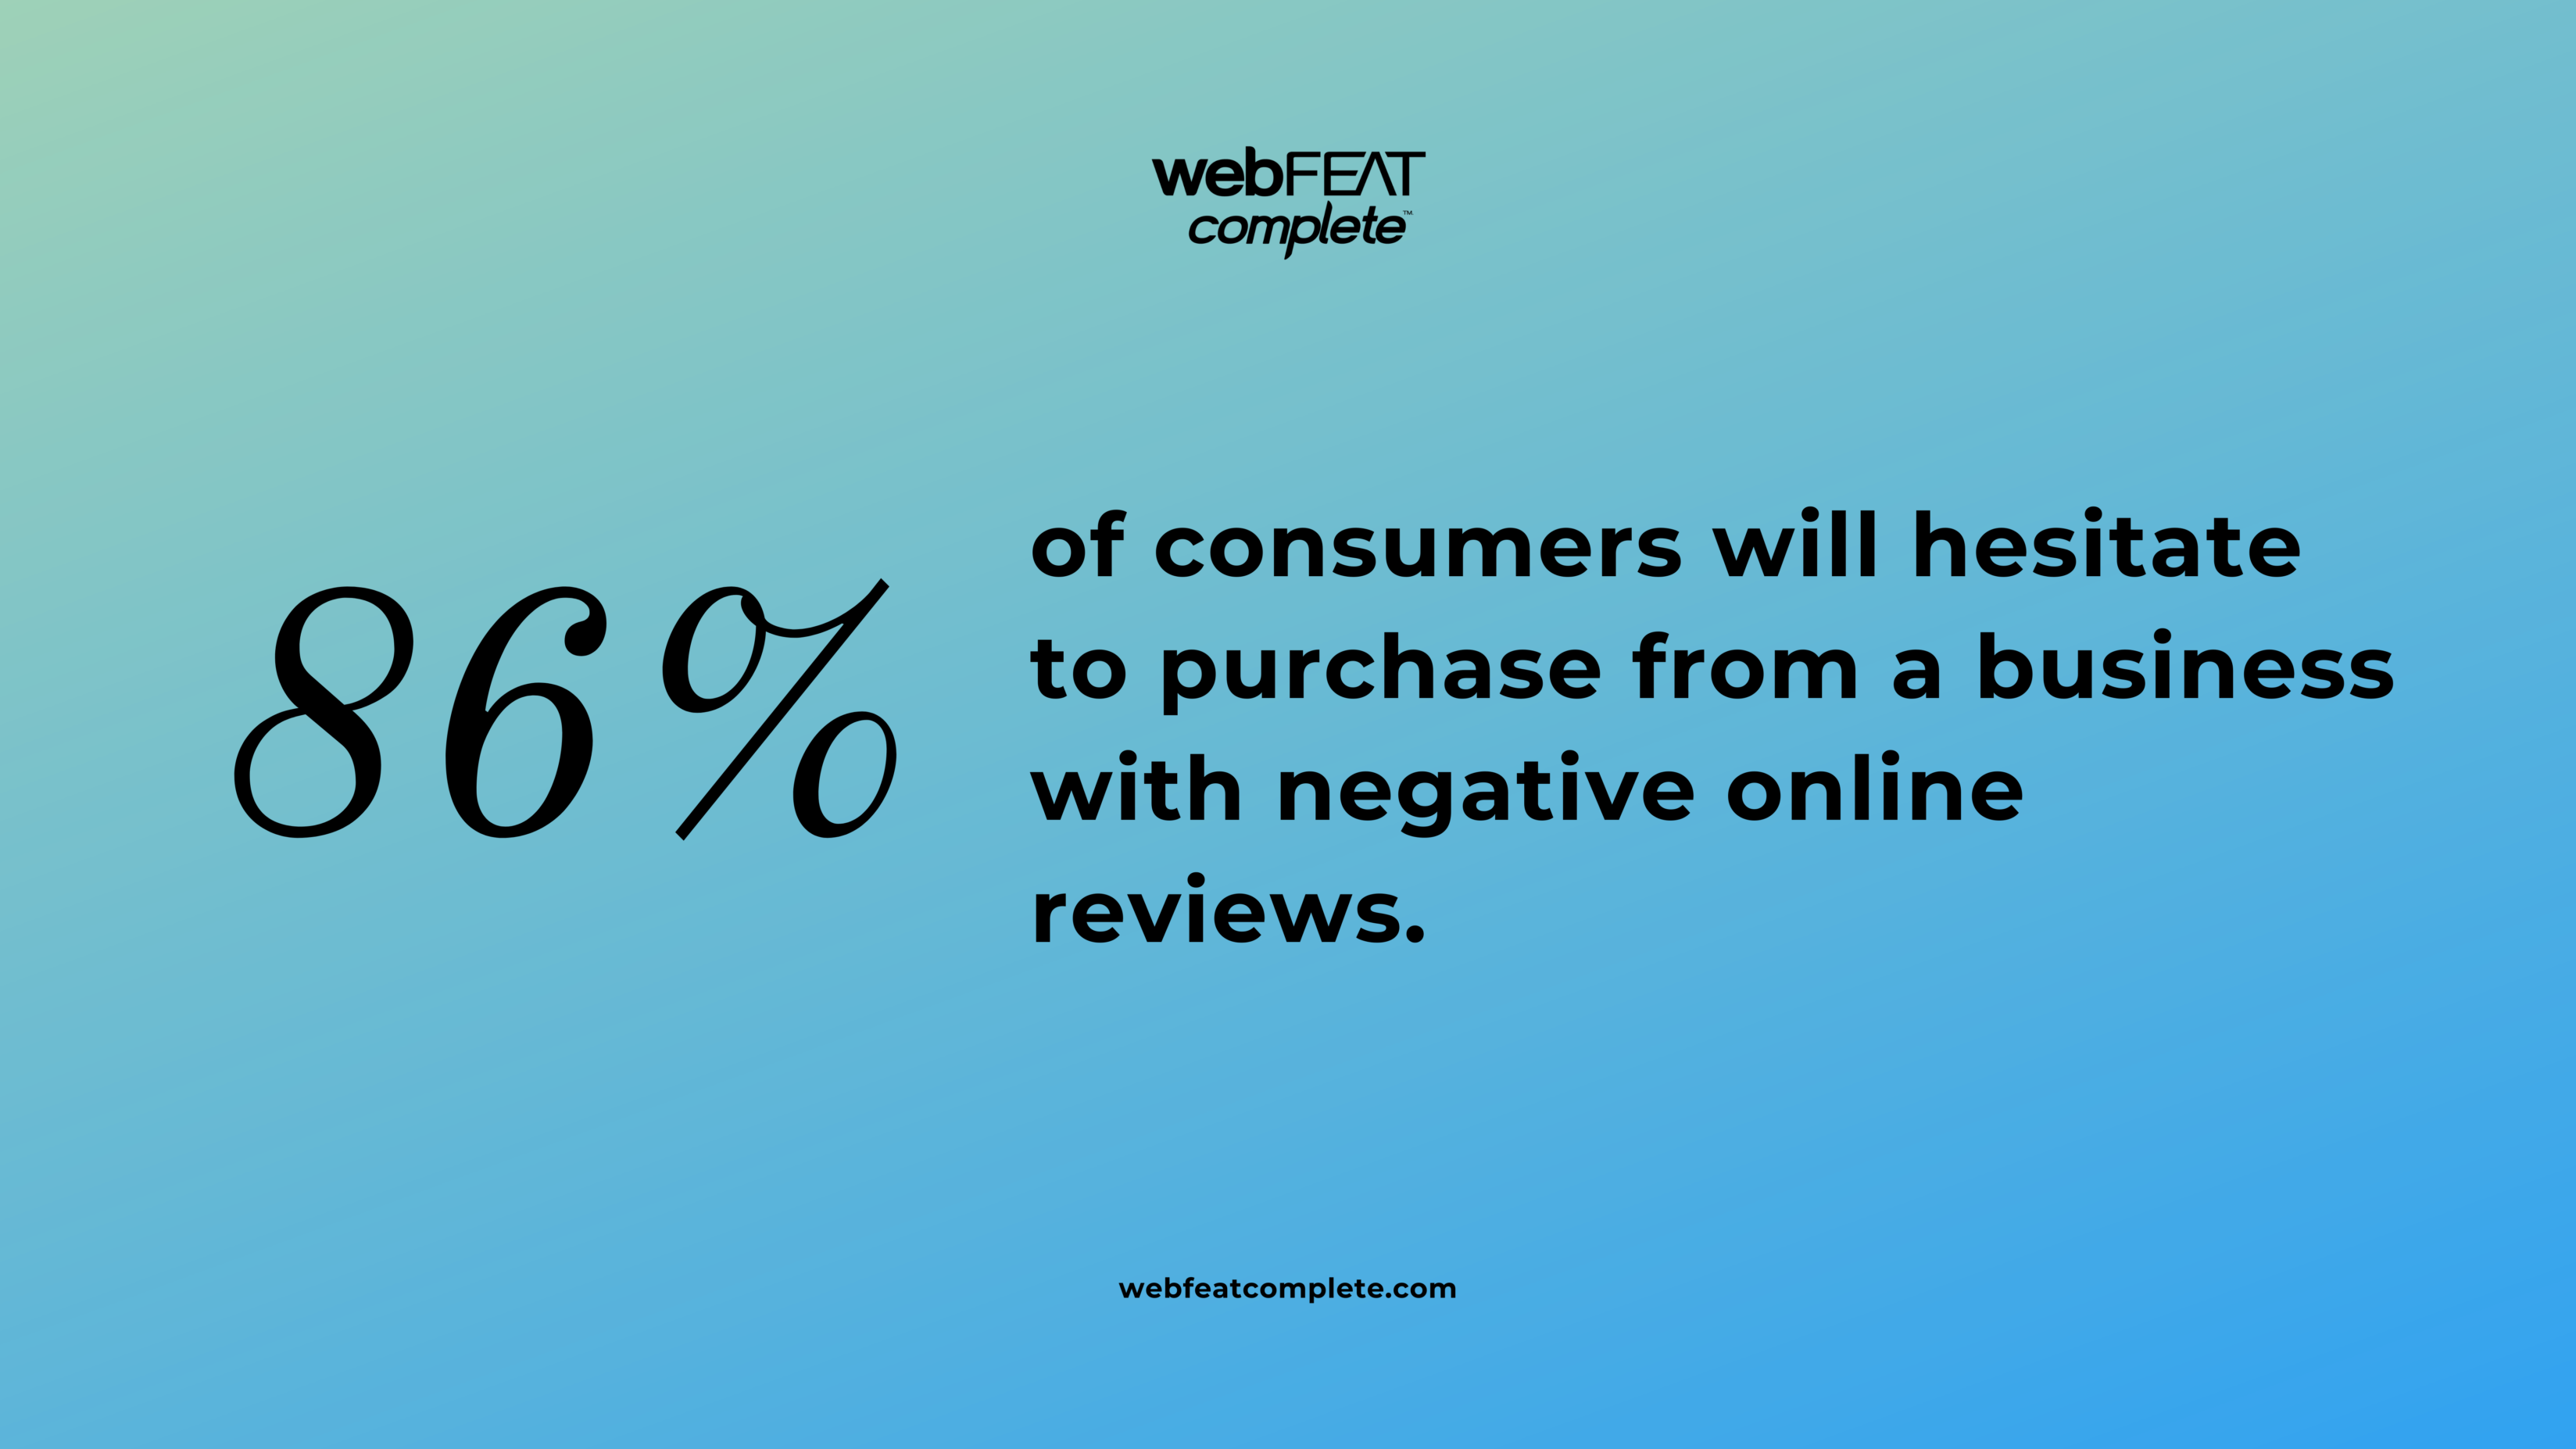 86% of consumers will hesitate to purchase from a business with negative online reviews.